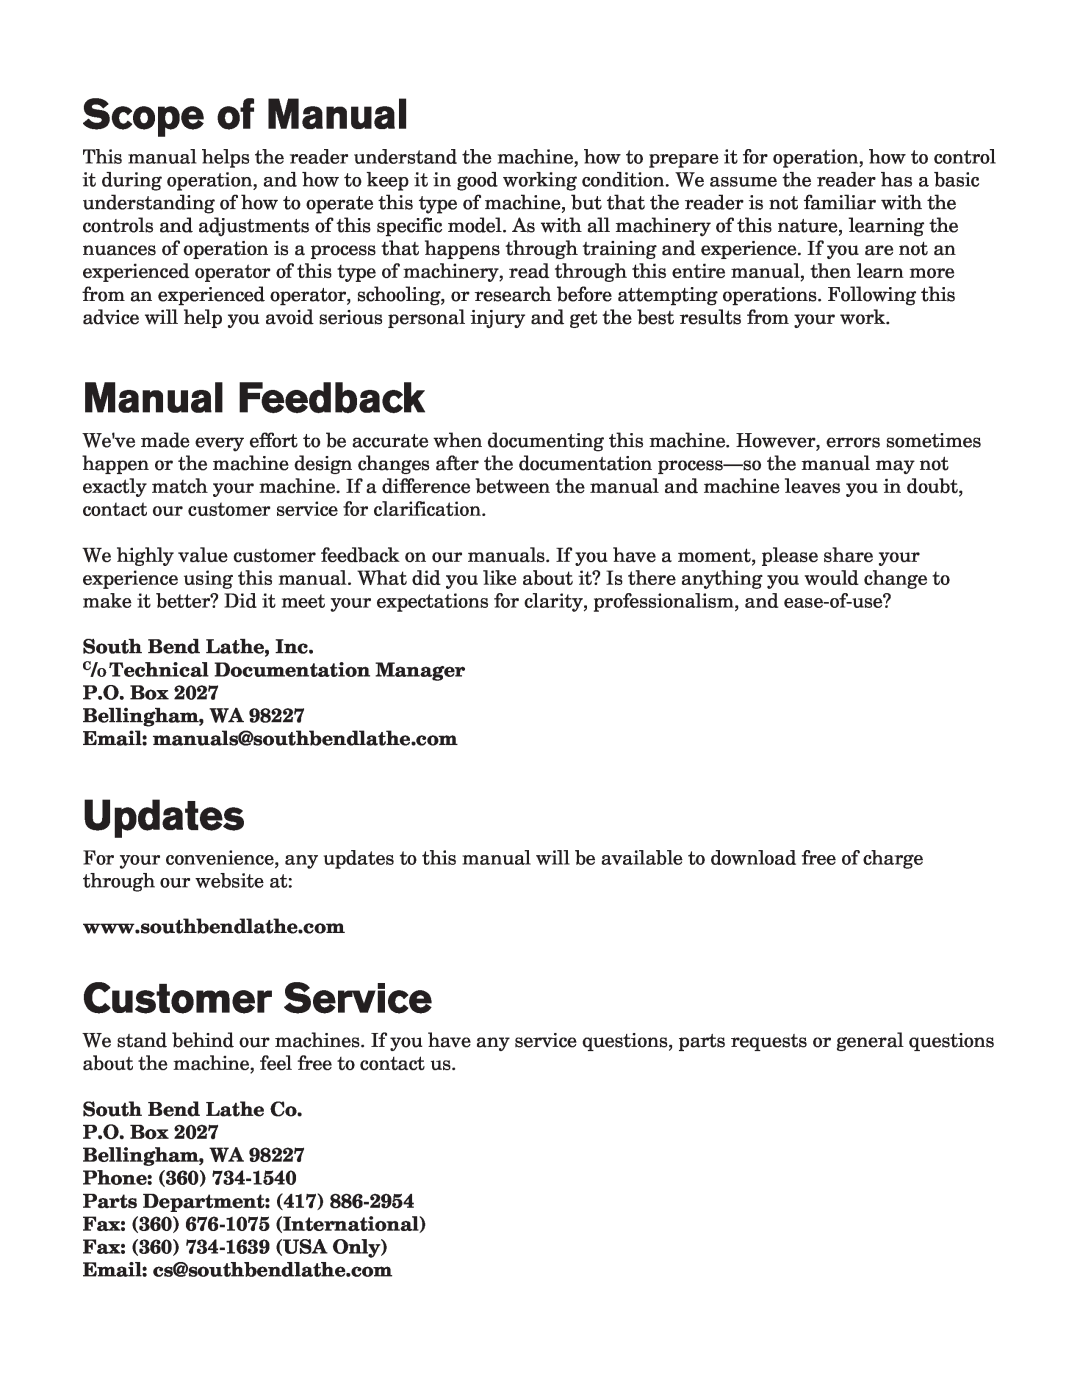 Southbend SB1019 owner manual Scope of Manual, Manual Feedback, Updates, Customer Service 